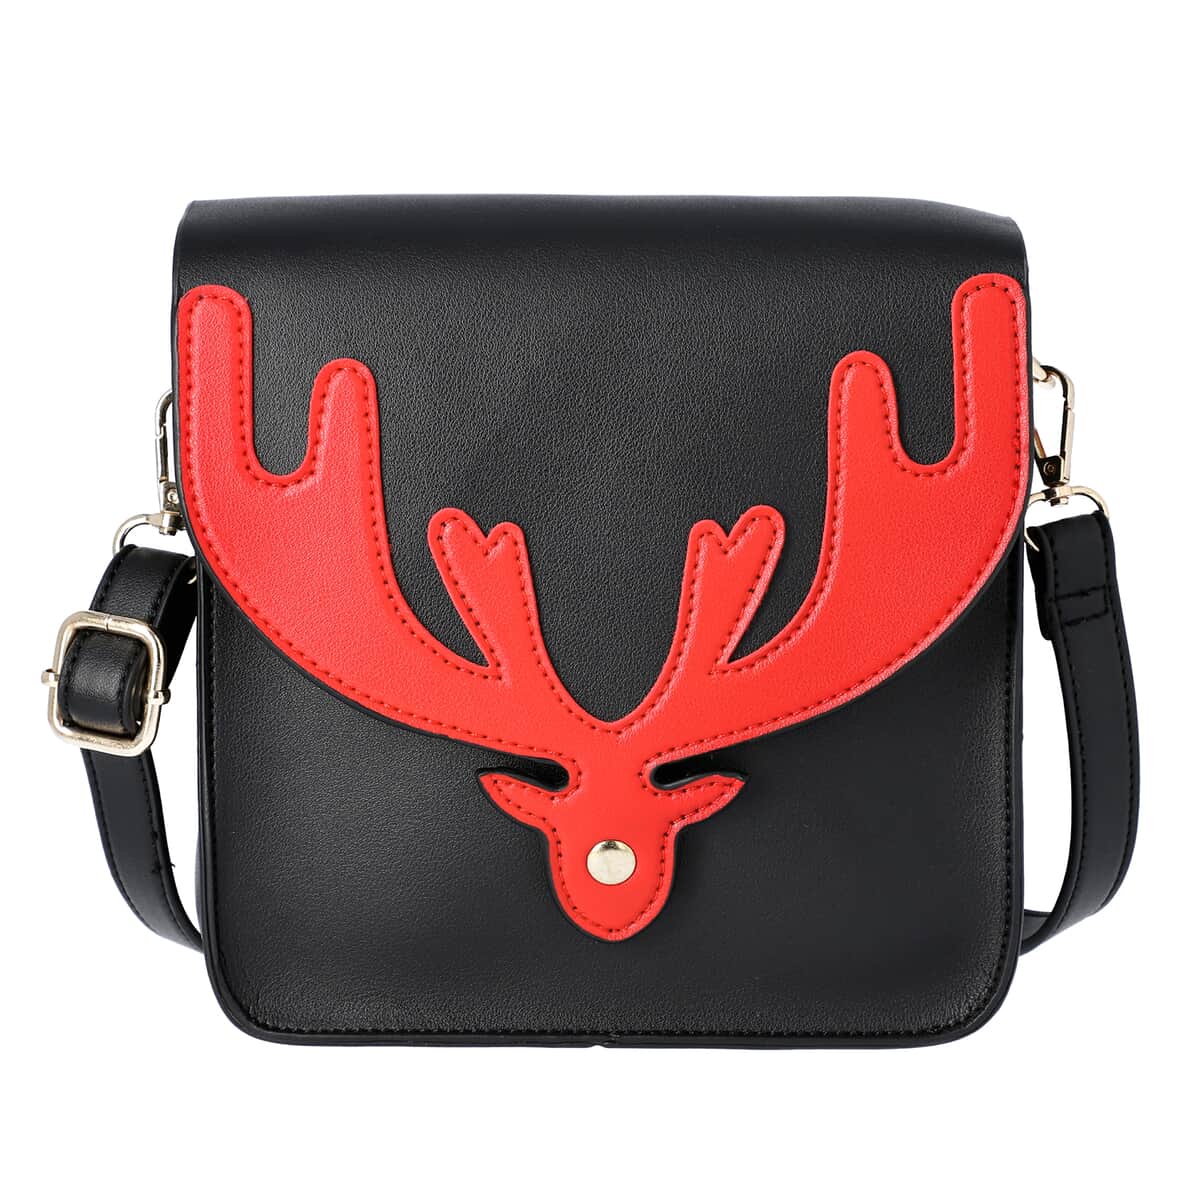 Black and Red Reindeer Antler Crossbody Bag with Detachable Shoulder Strap, Faux Leather Crossbody Bag for Women, Handbag, Perfect Pick for Christmas Party image number 0